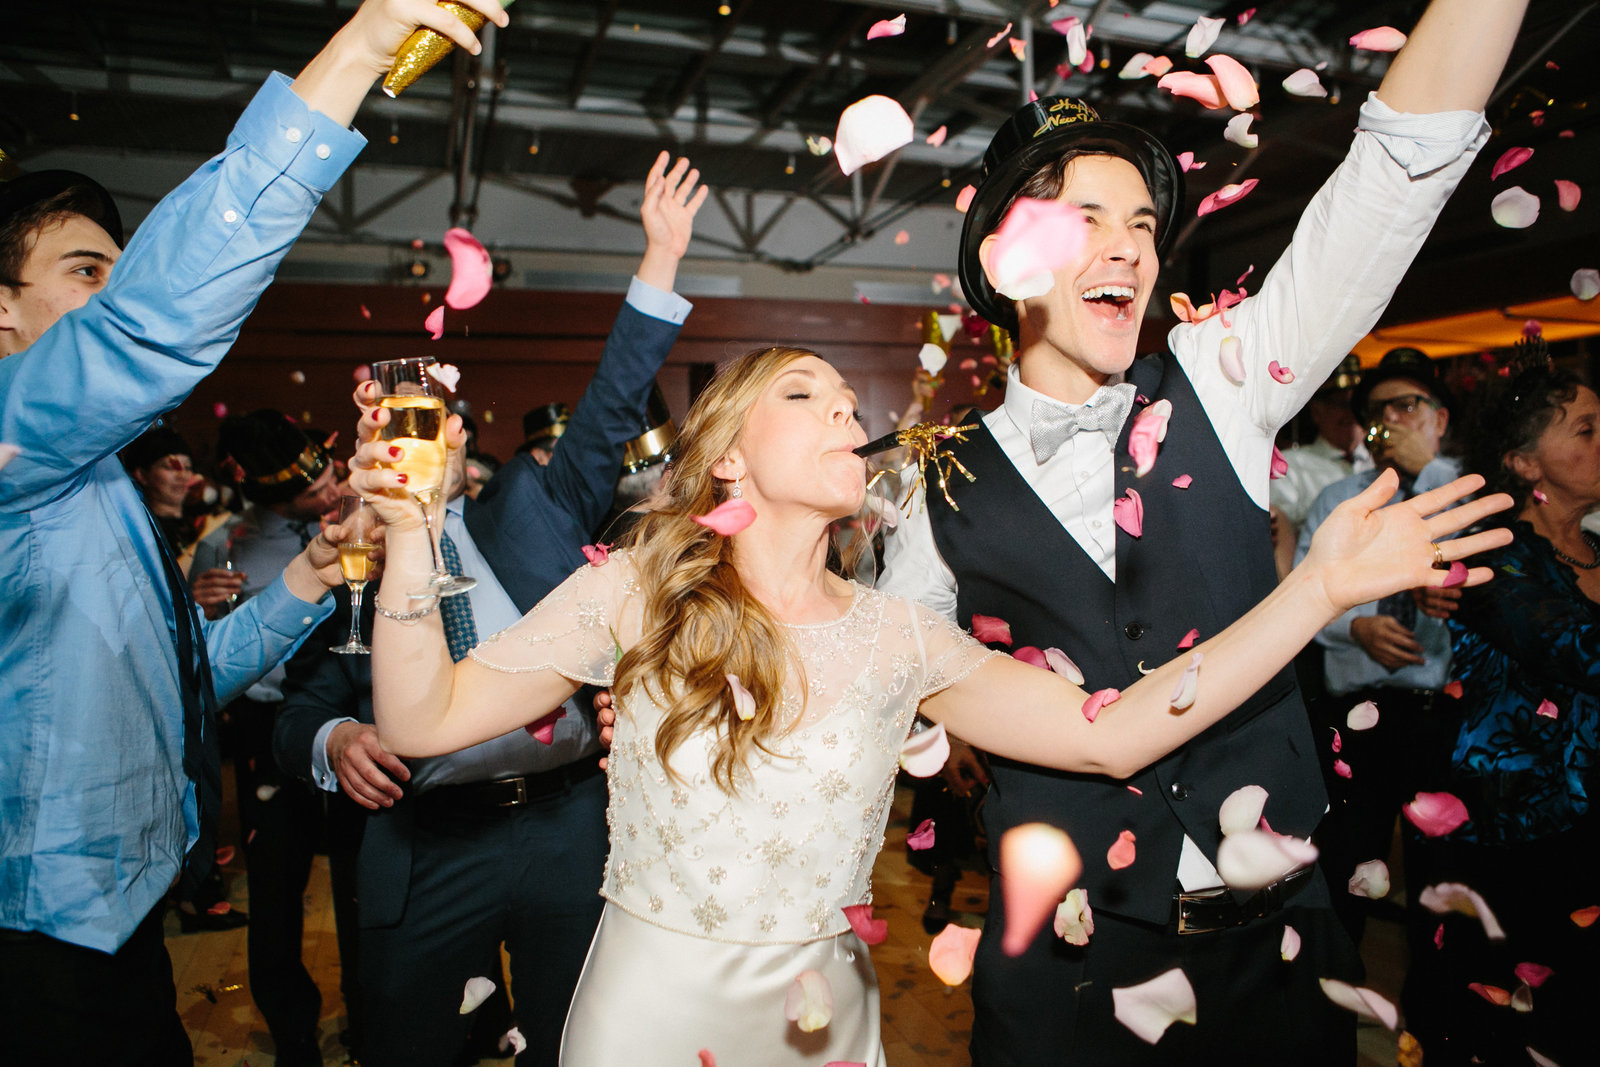 Bride and groom photographed having the time of their life at their wedding reception.